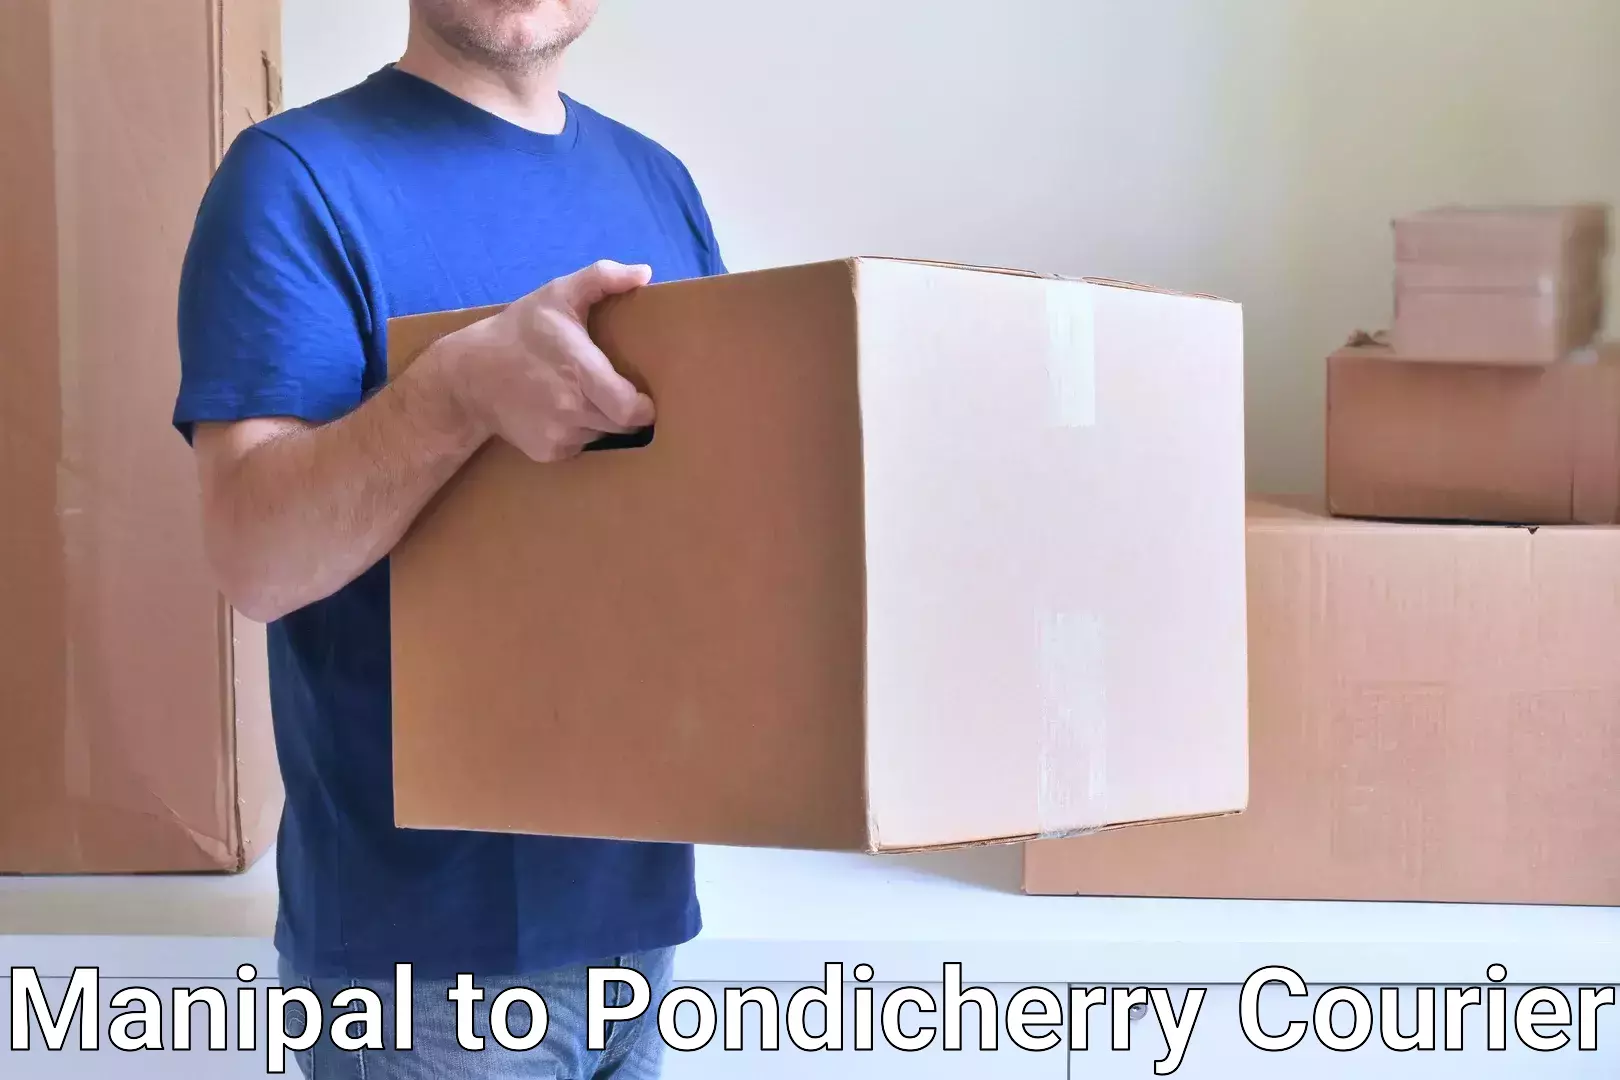 Quality courier partnerships Manipal to Pondicherry